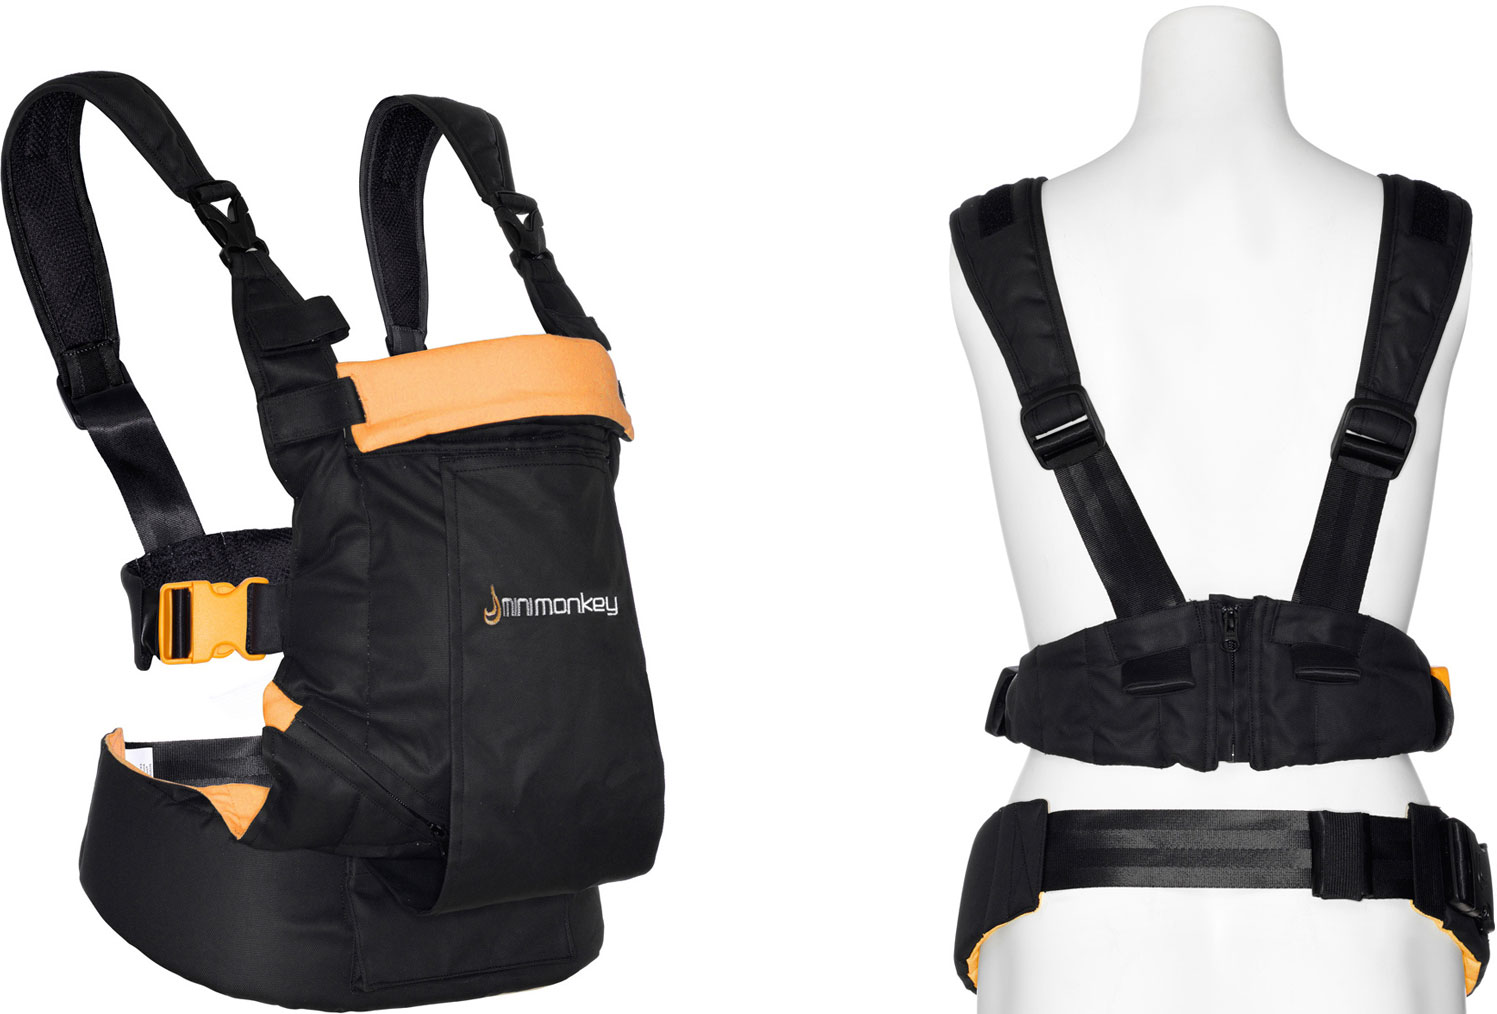 dividend syndroom Tegenstander Dynamic Baby Carrier - SOLD OUT - Minimonkey